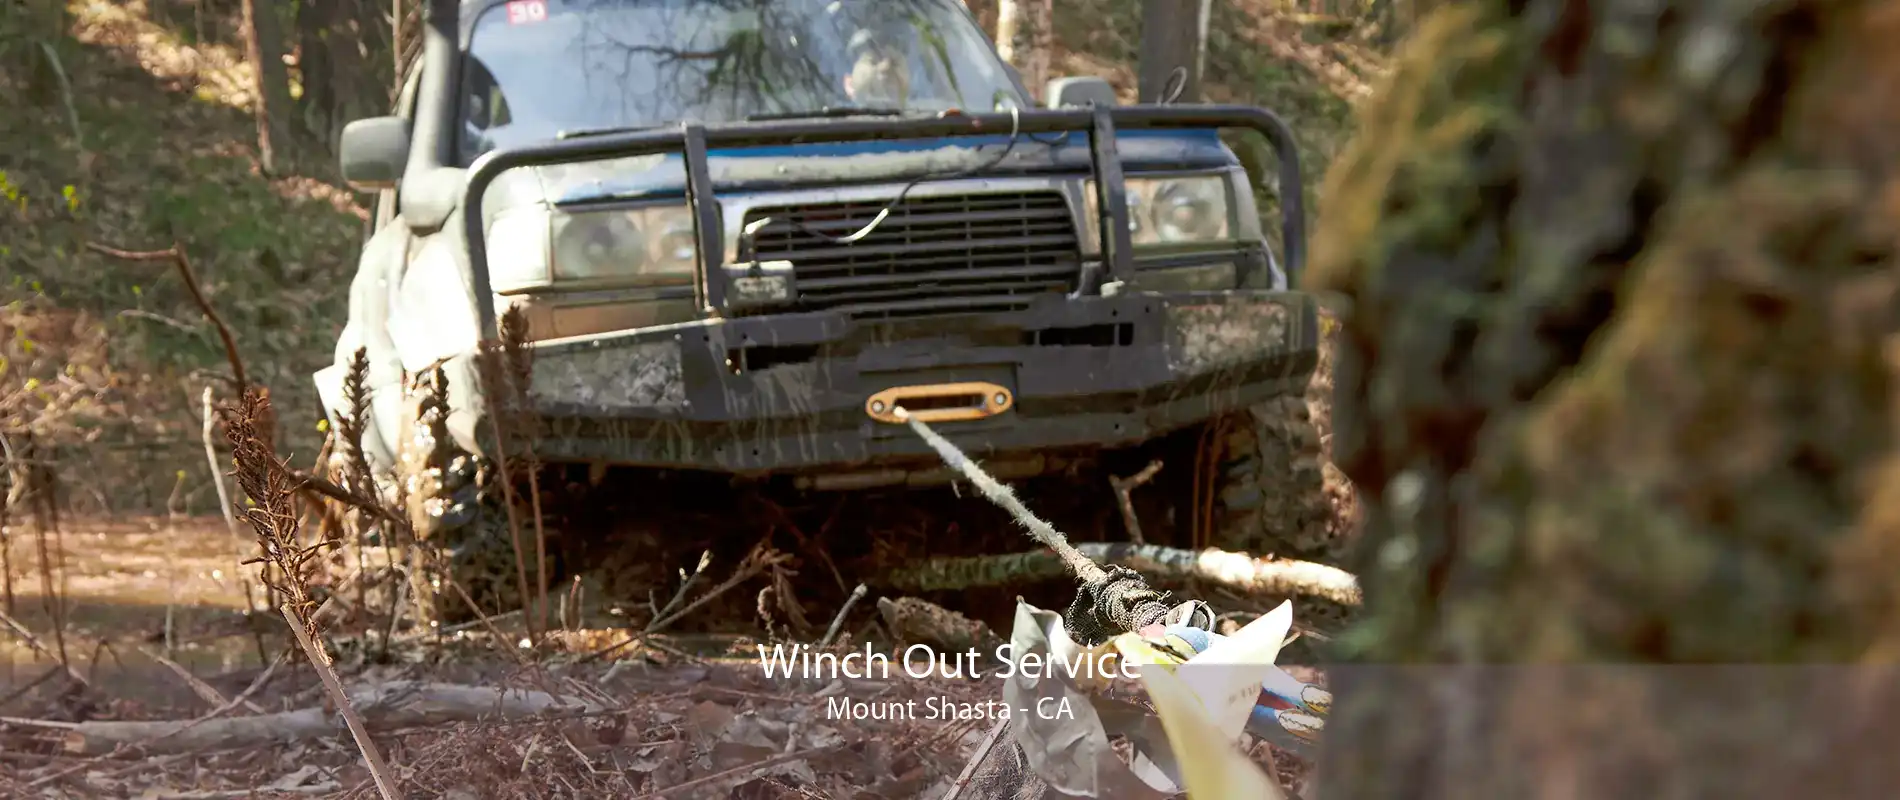 Winch Out Service Mount Shasta - CA